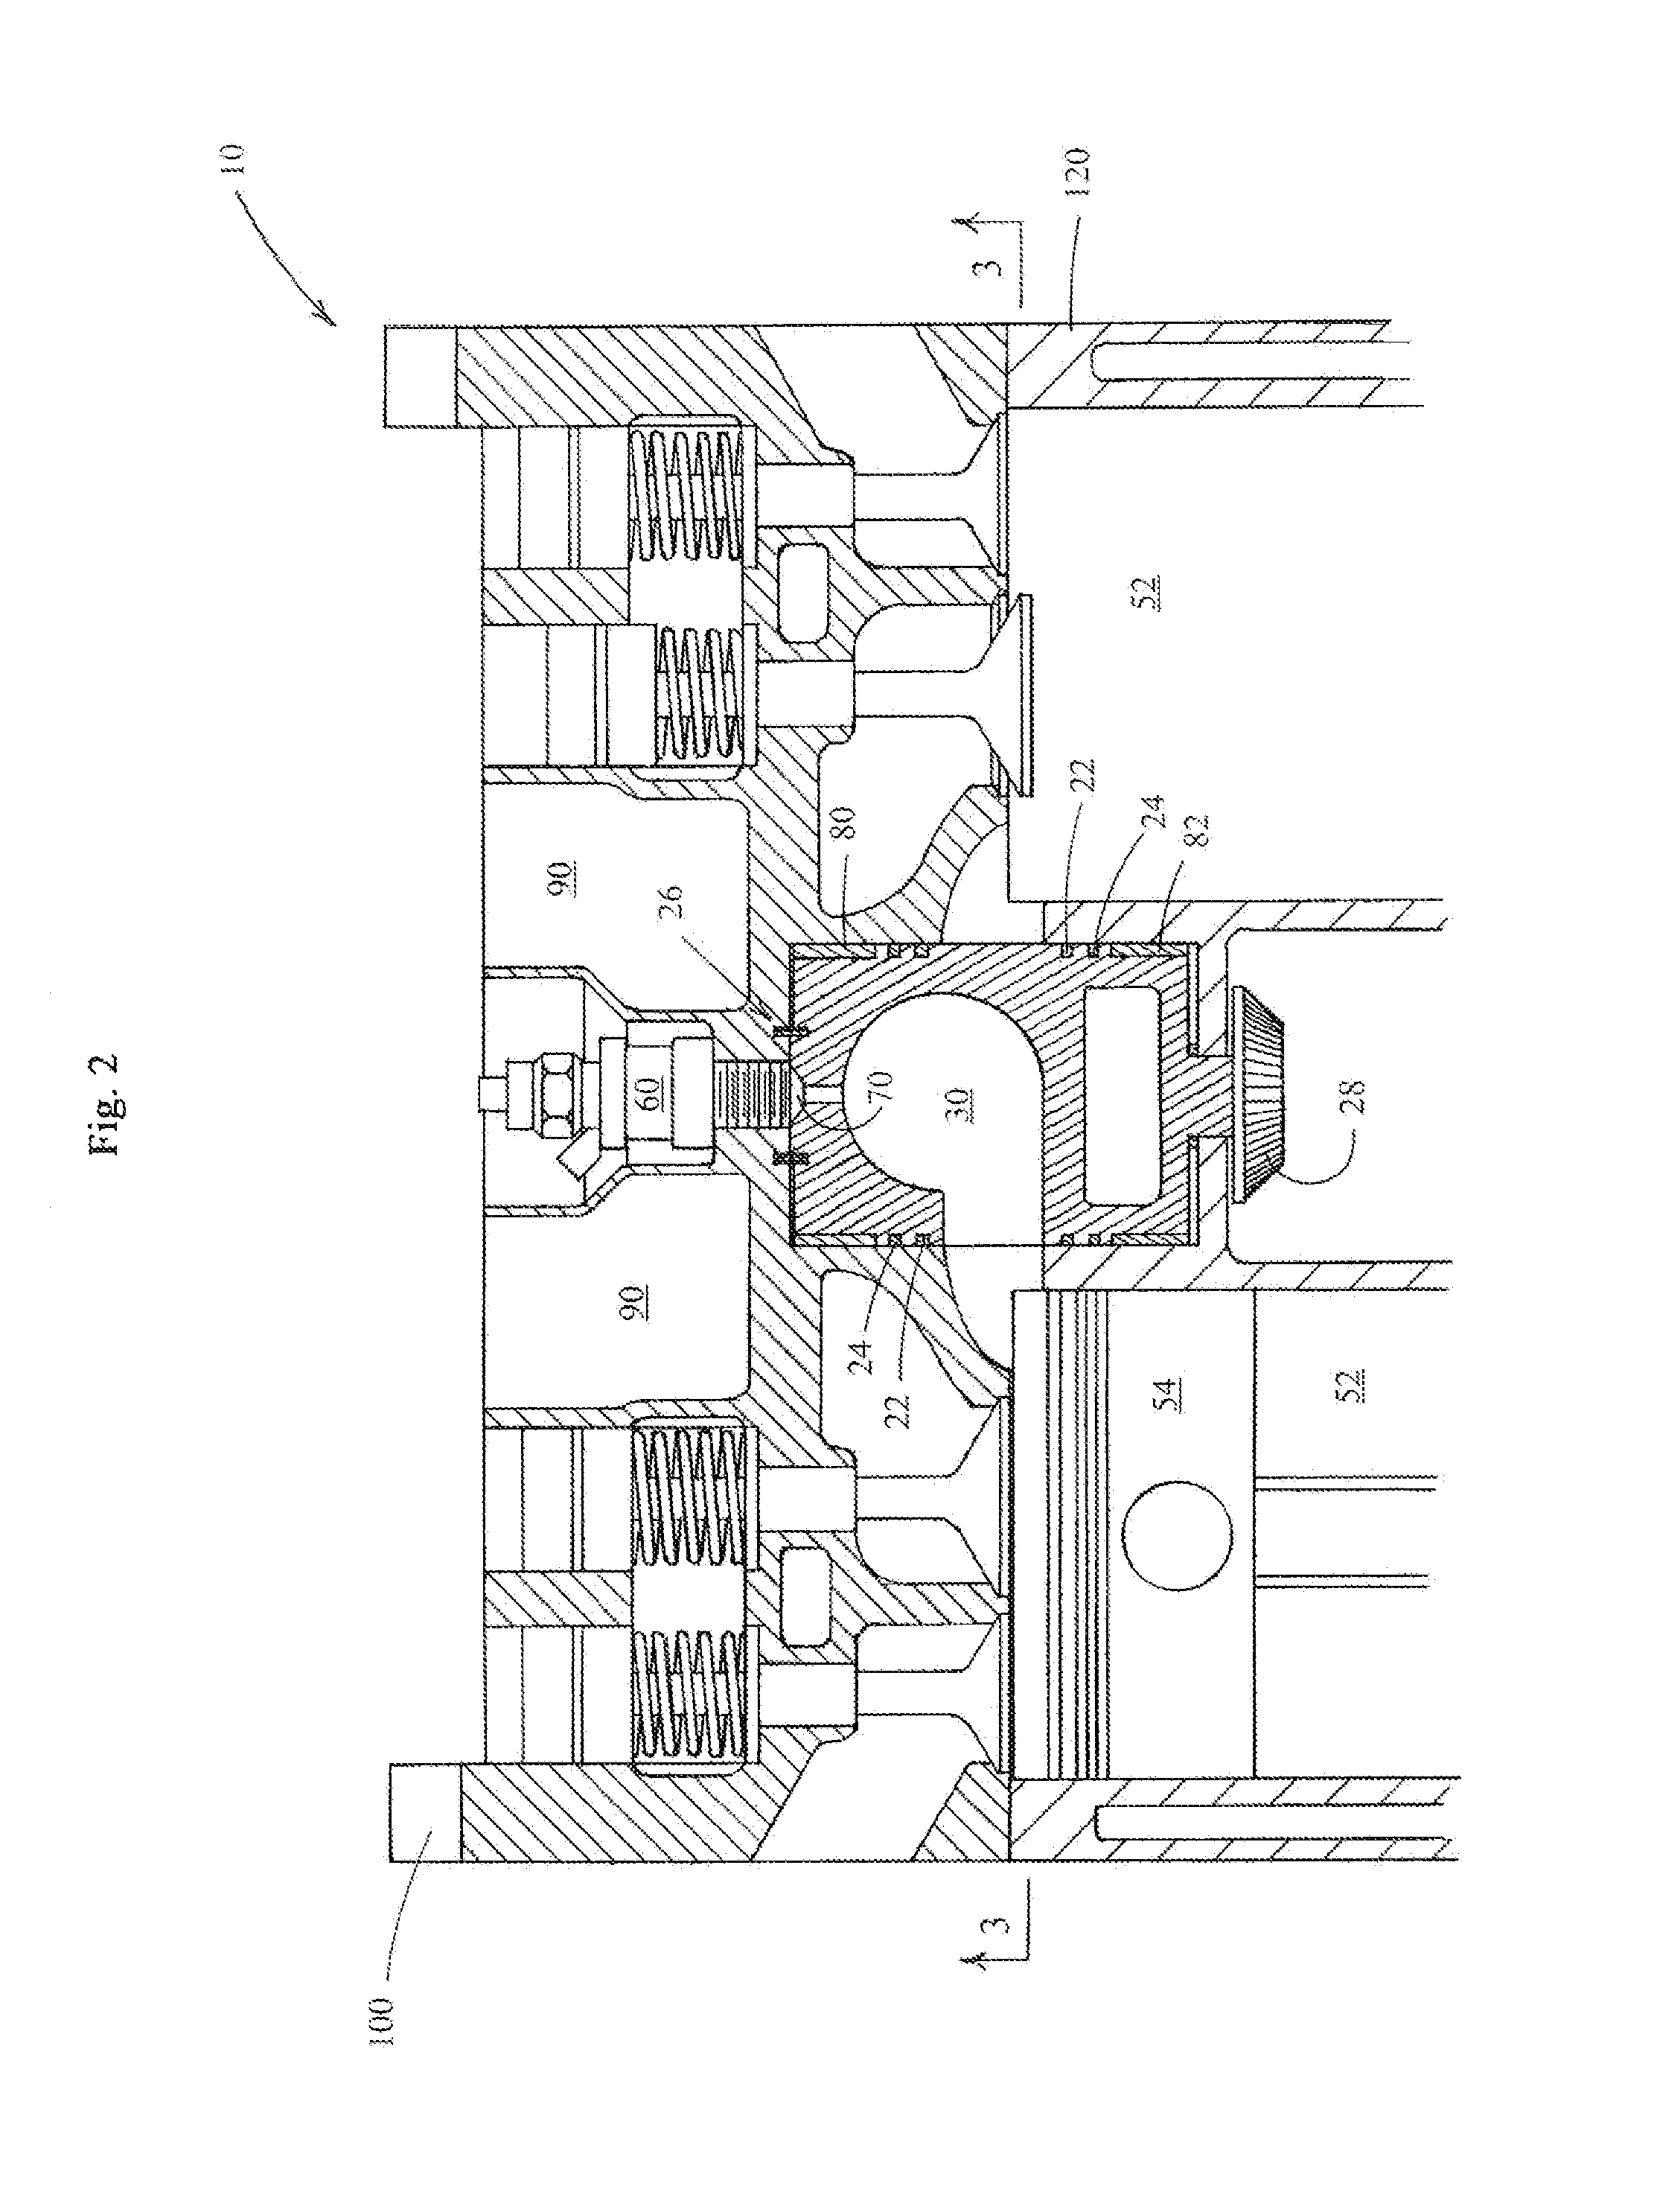 Engine having a rotary combustion chamber